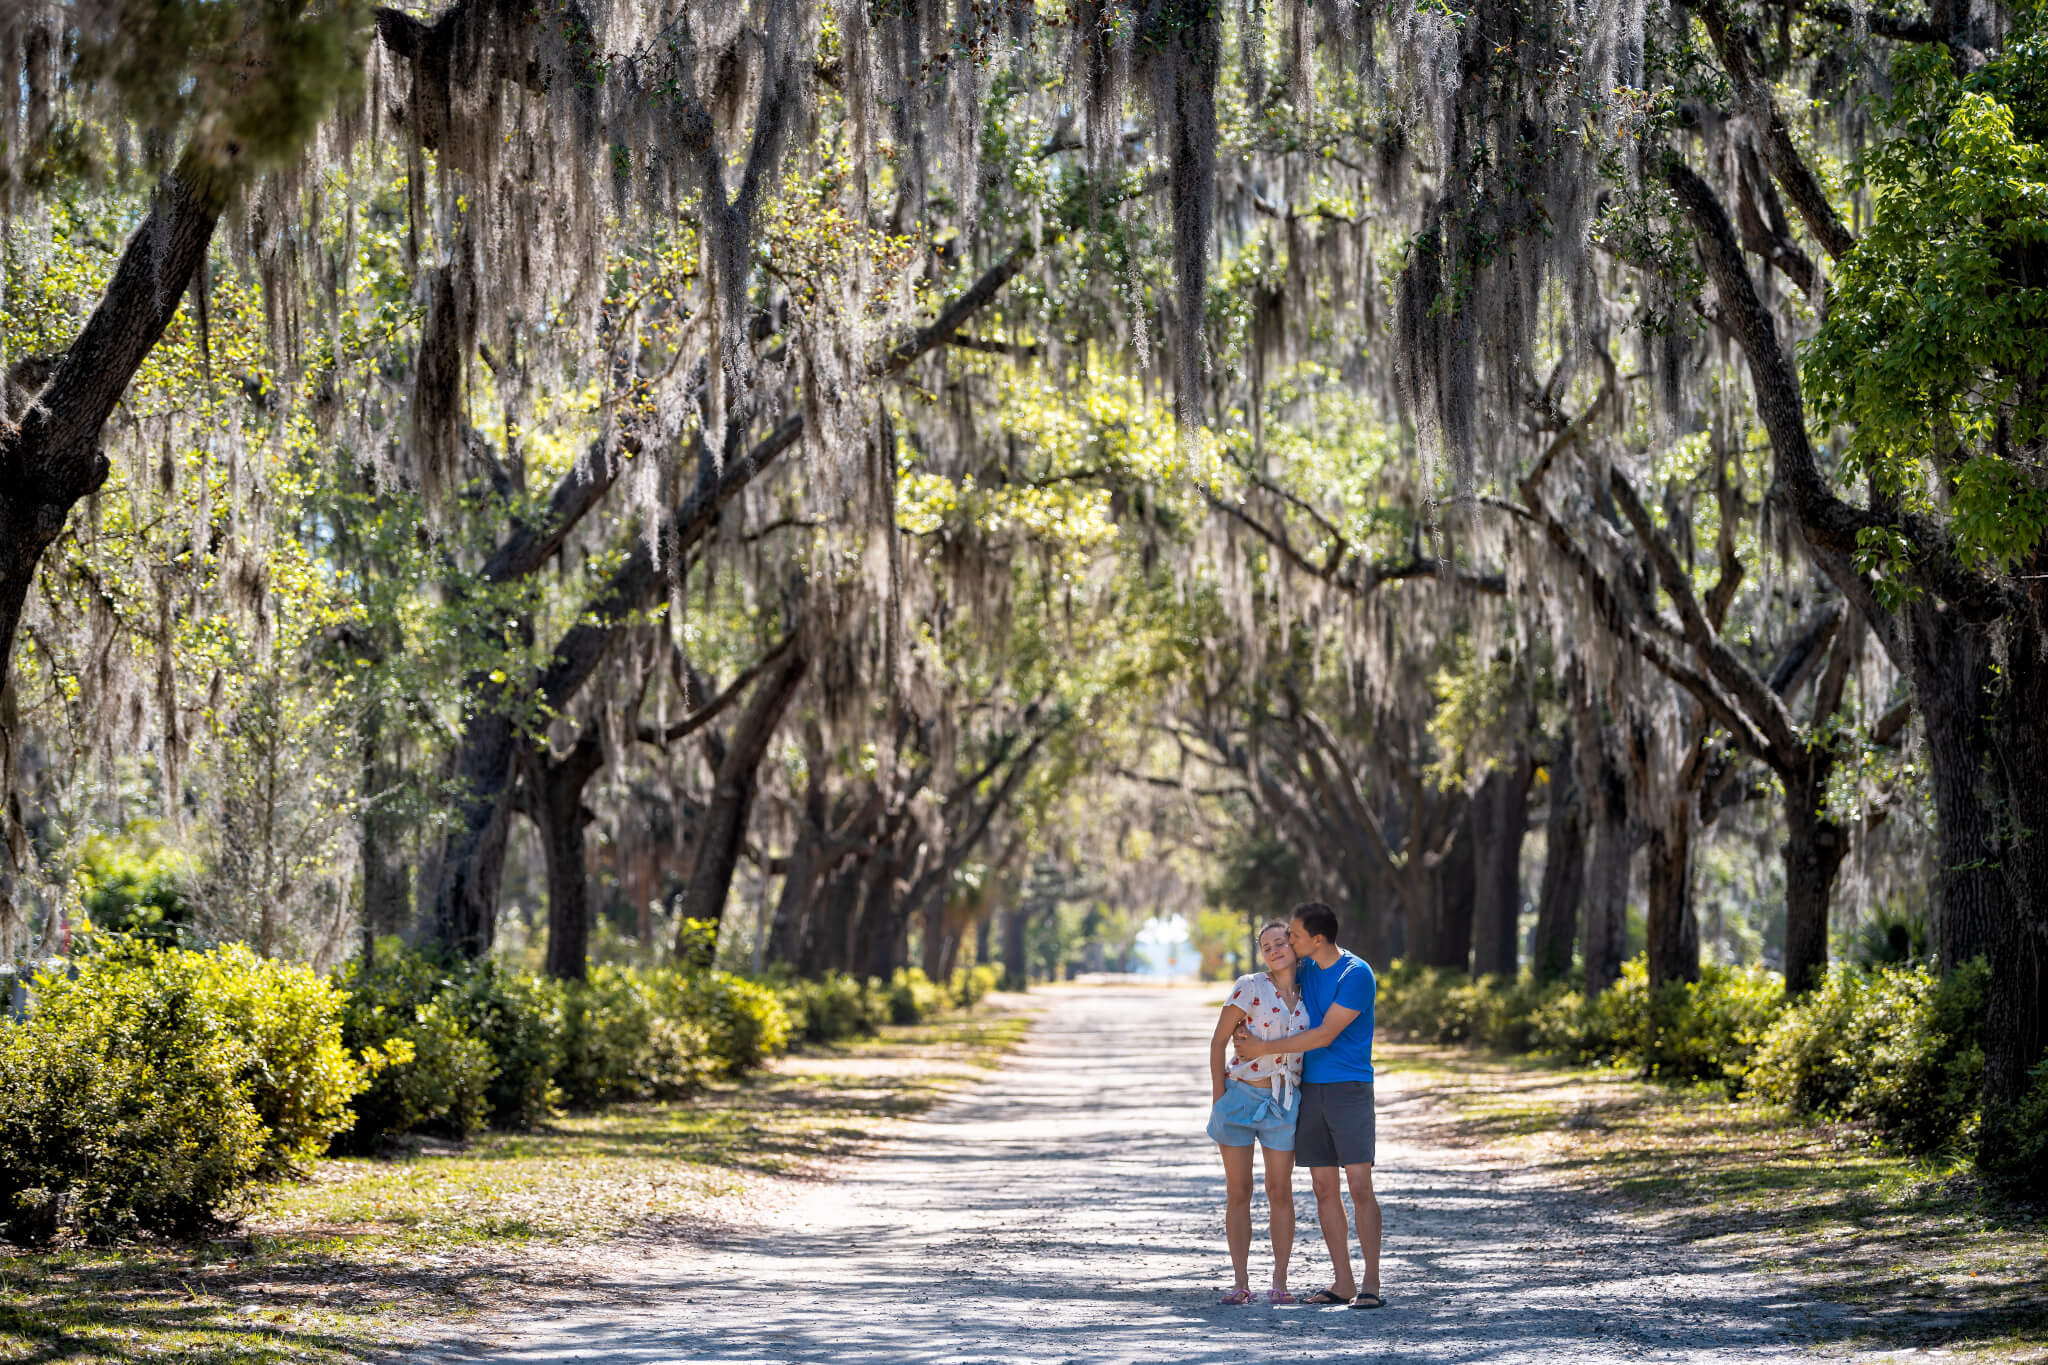 Street road landscape with oak trees path in Savannah, Georgia famous Bonaventure cemetery with Spanish moss and young happy romantic couple standing embracing love